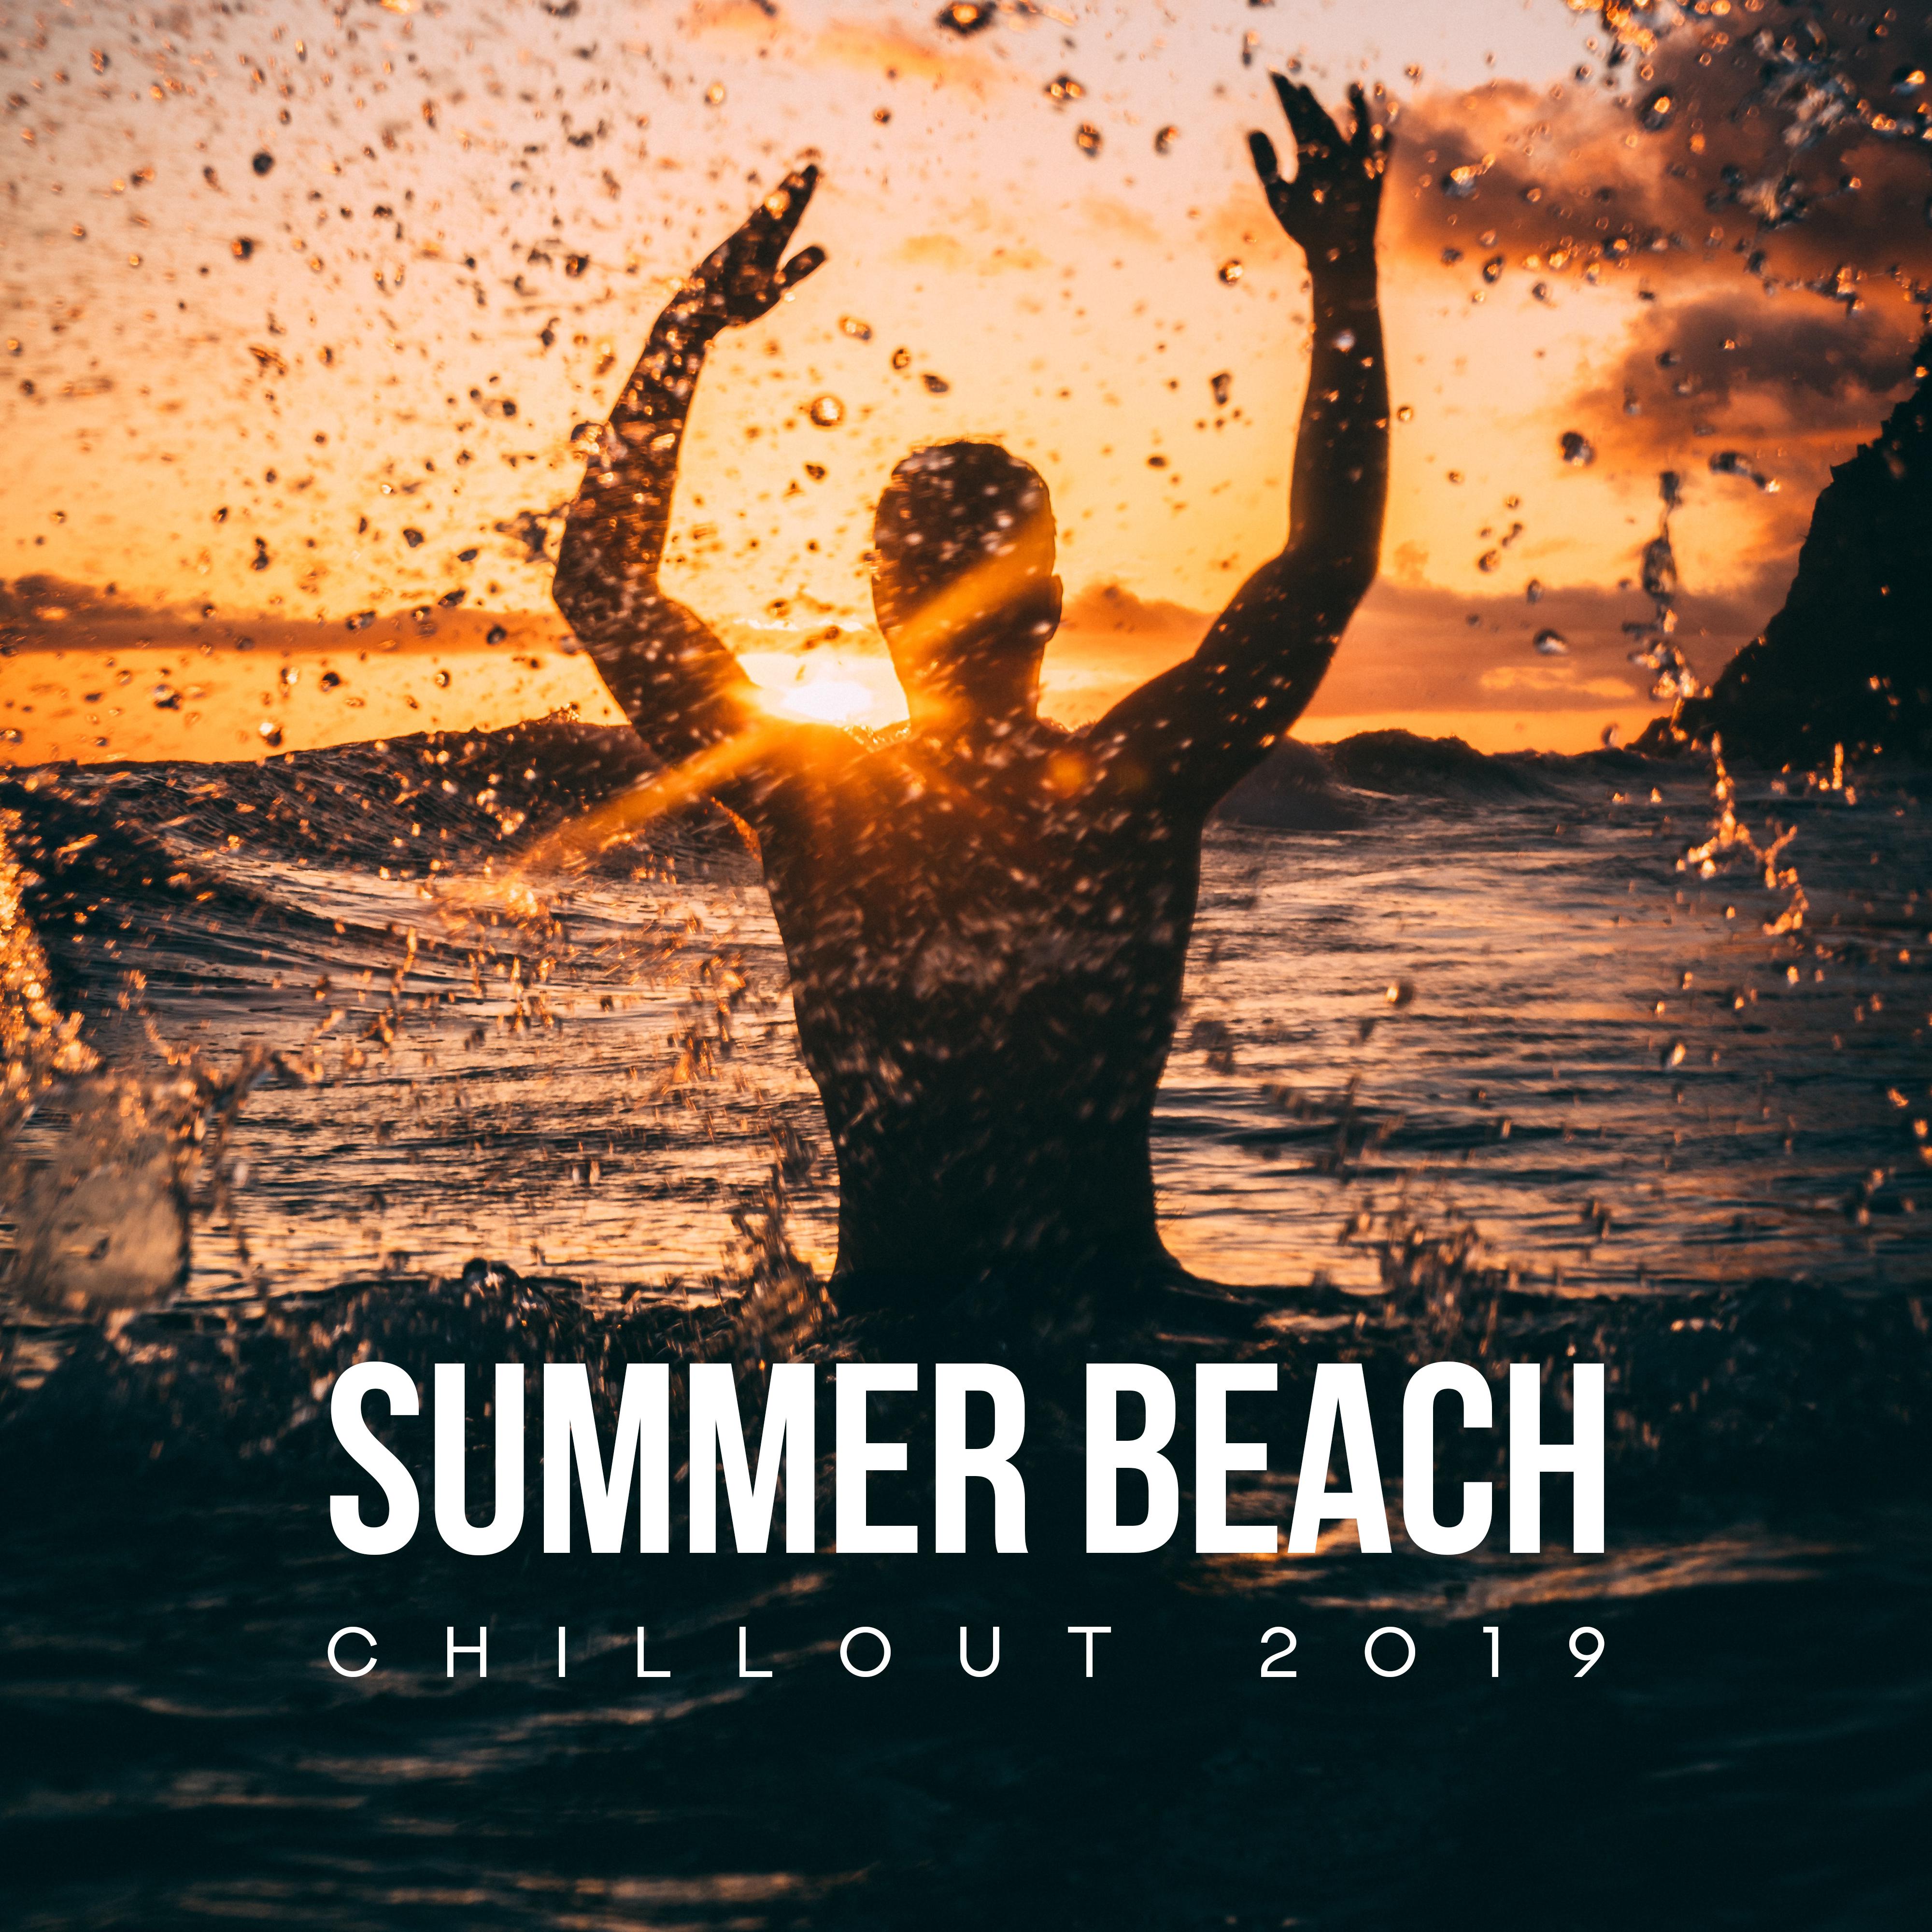 Summer Beach Chillout 2019: Relaxing Music, Ibiza Lounge, Pure Waves, Beach Songs, Total Relax, Summer Chill Out 2019